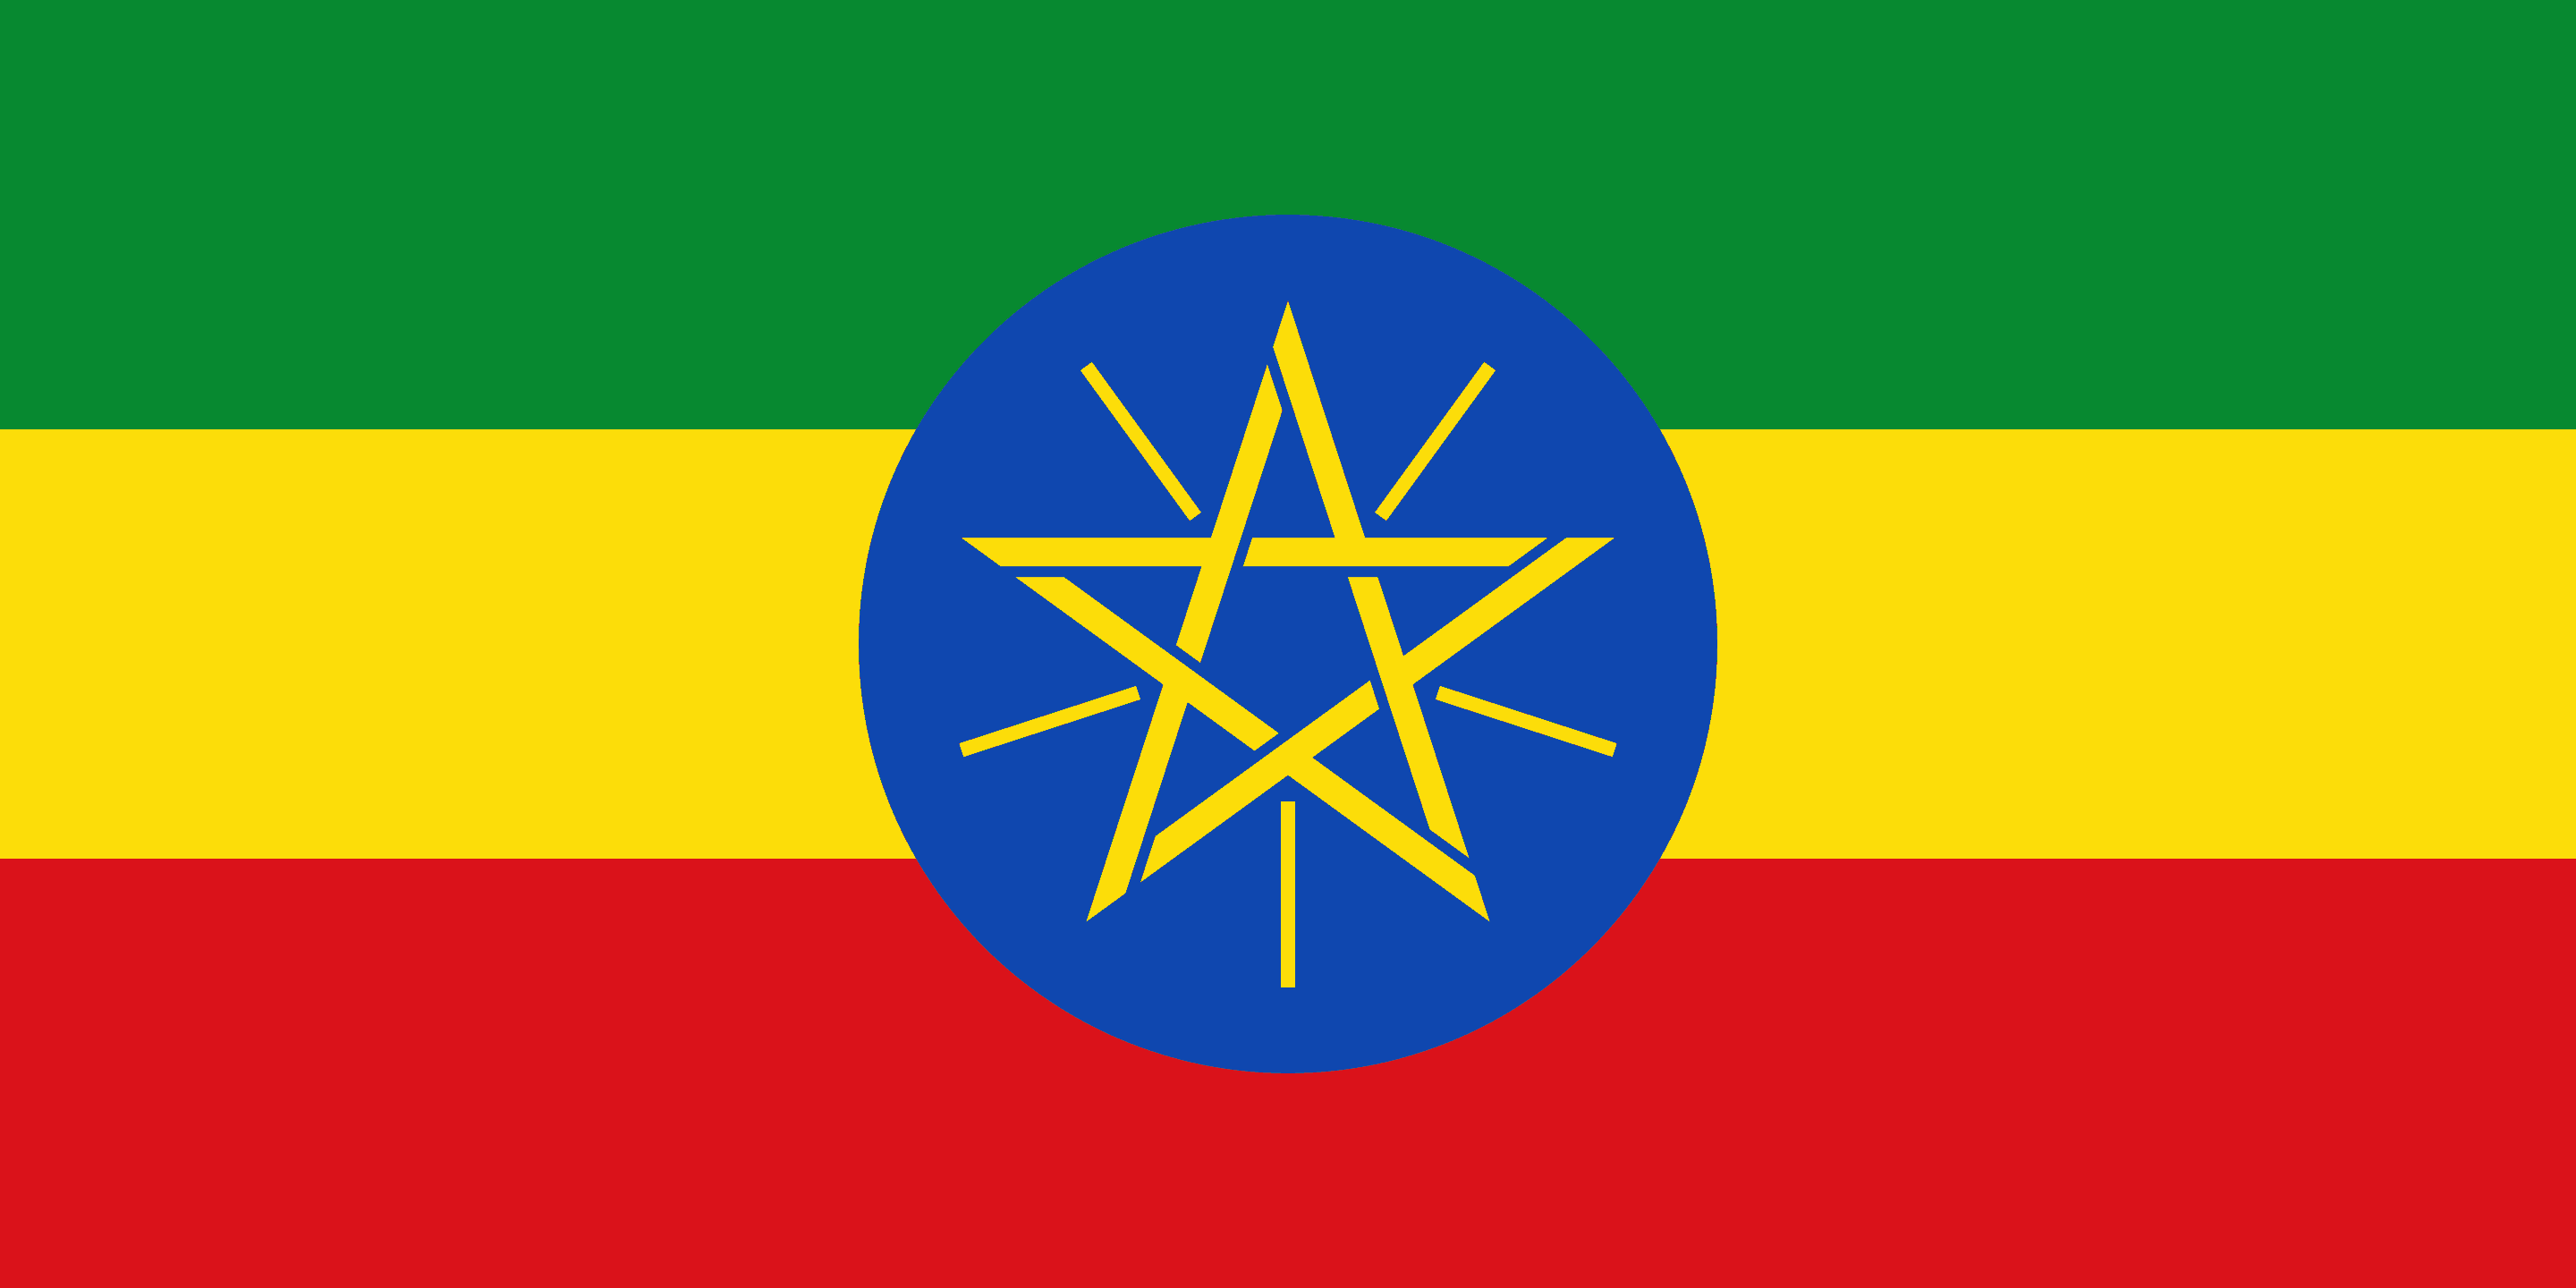 Drone Laws in Ethiopia